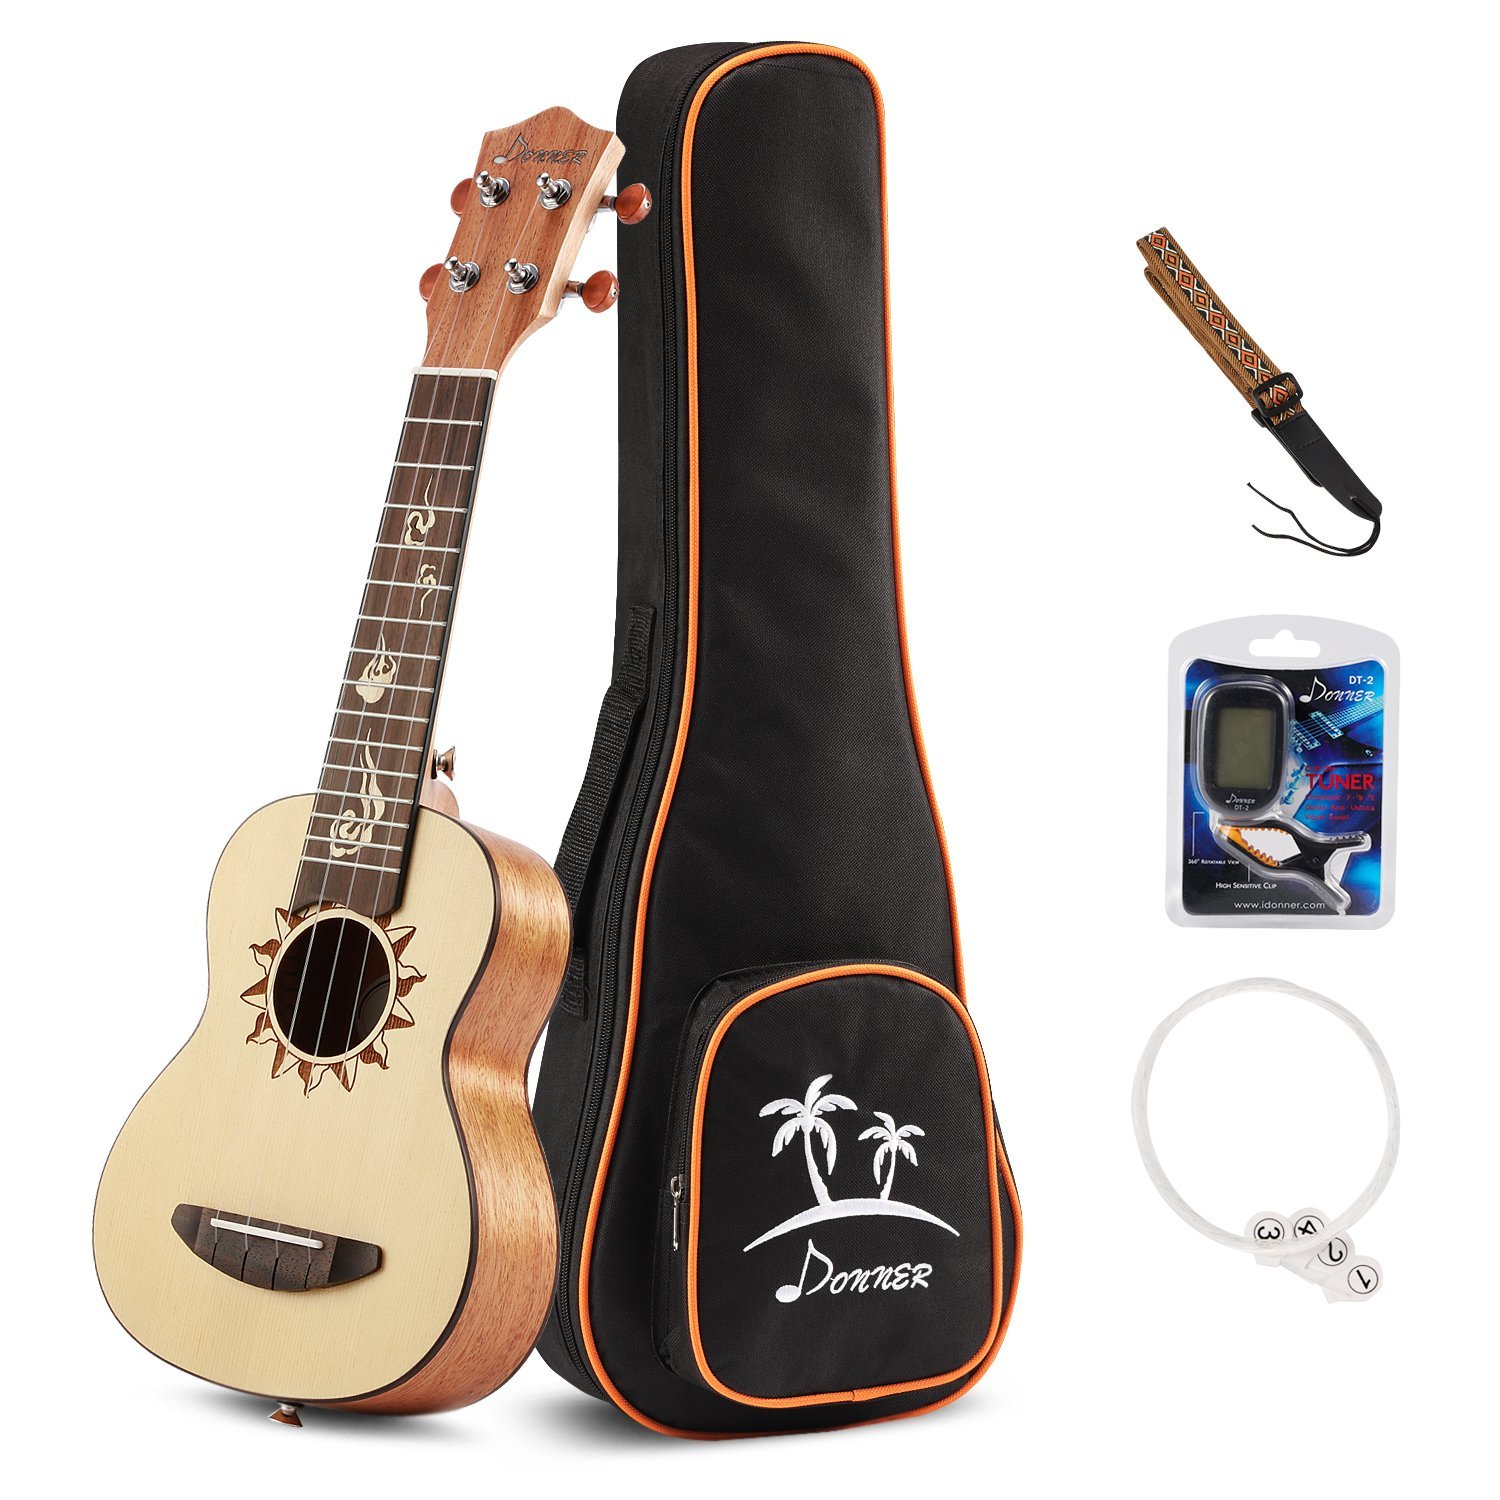 Donner Soprano Ukulele w/ Bag and more! Just $44.25!